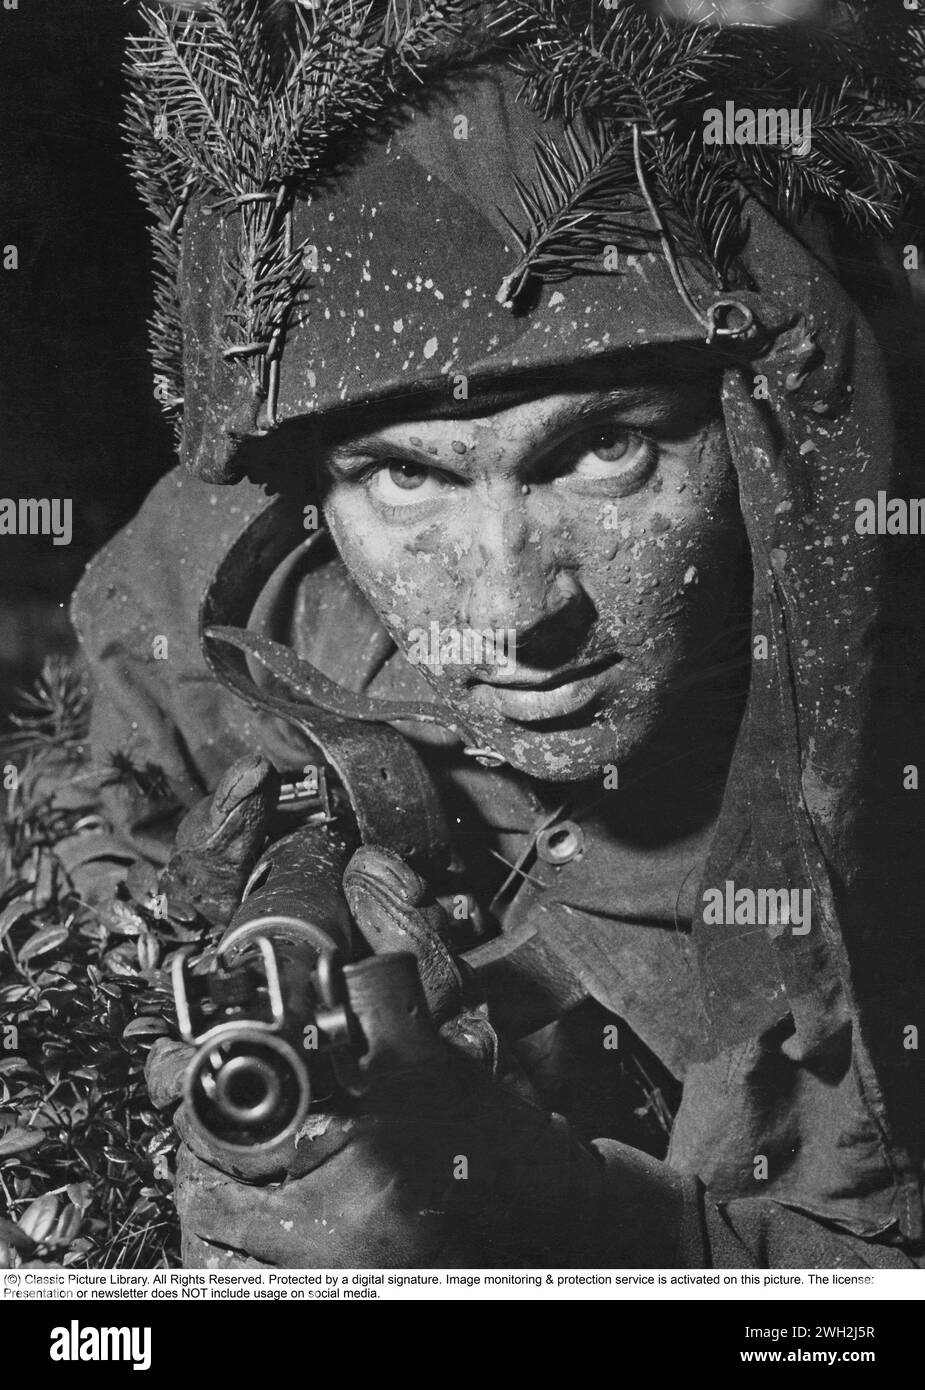 Swedish soldier in the 1950s. A young man during a military exercise has camouflaged himself well with fir branches in his helmet. He has a loaded submachine gun in his hands and is ready for battle. In 1945, Sweden introduced the 9 mm Parabellum Carl Gustaf m/45 with a design borrowing from and improving on many design elements of earlier submachine-gun designs. It has a tubular stamped steel receiver with a side folding stock. The m/45 was widely exported, and especially popular with CIA operatives and U.S. Special Forces during the Vietnam War. In U.S. service it was known as the "Swedish-K Stock Photo